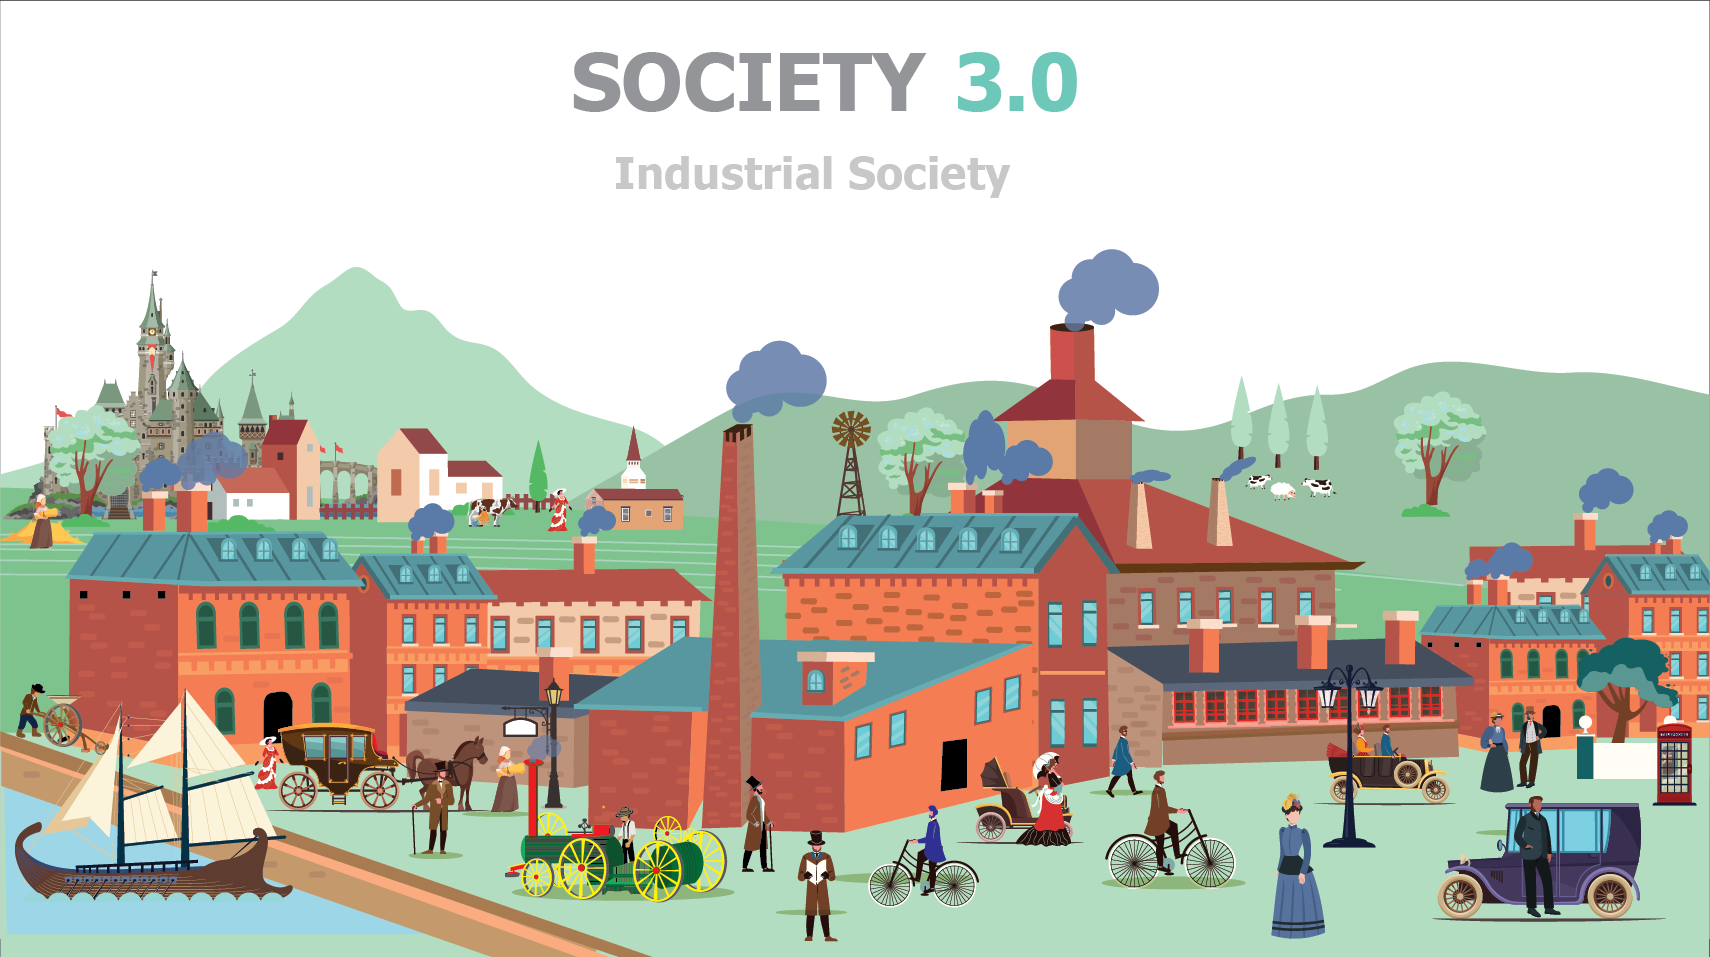 The industrial society